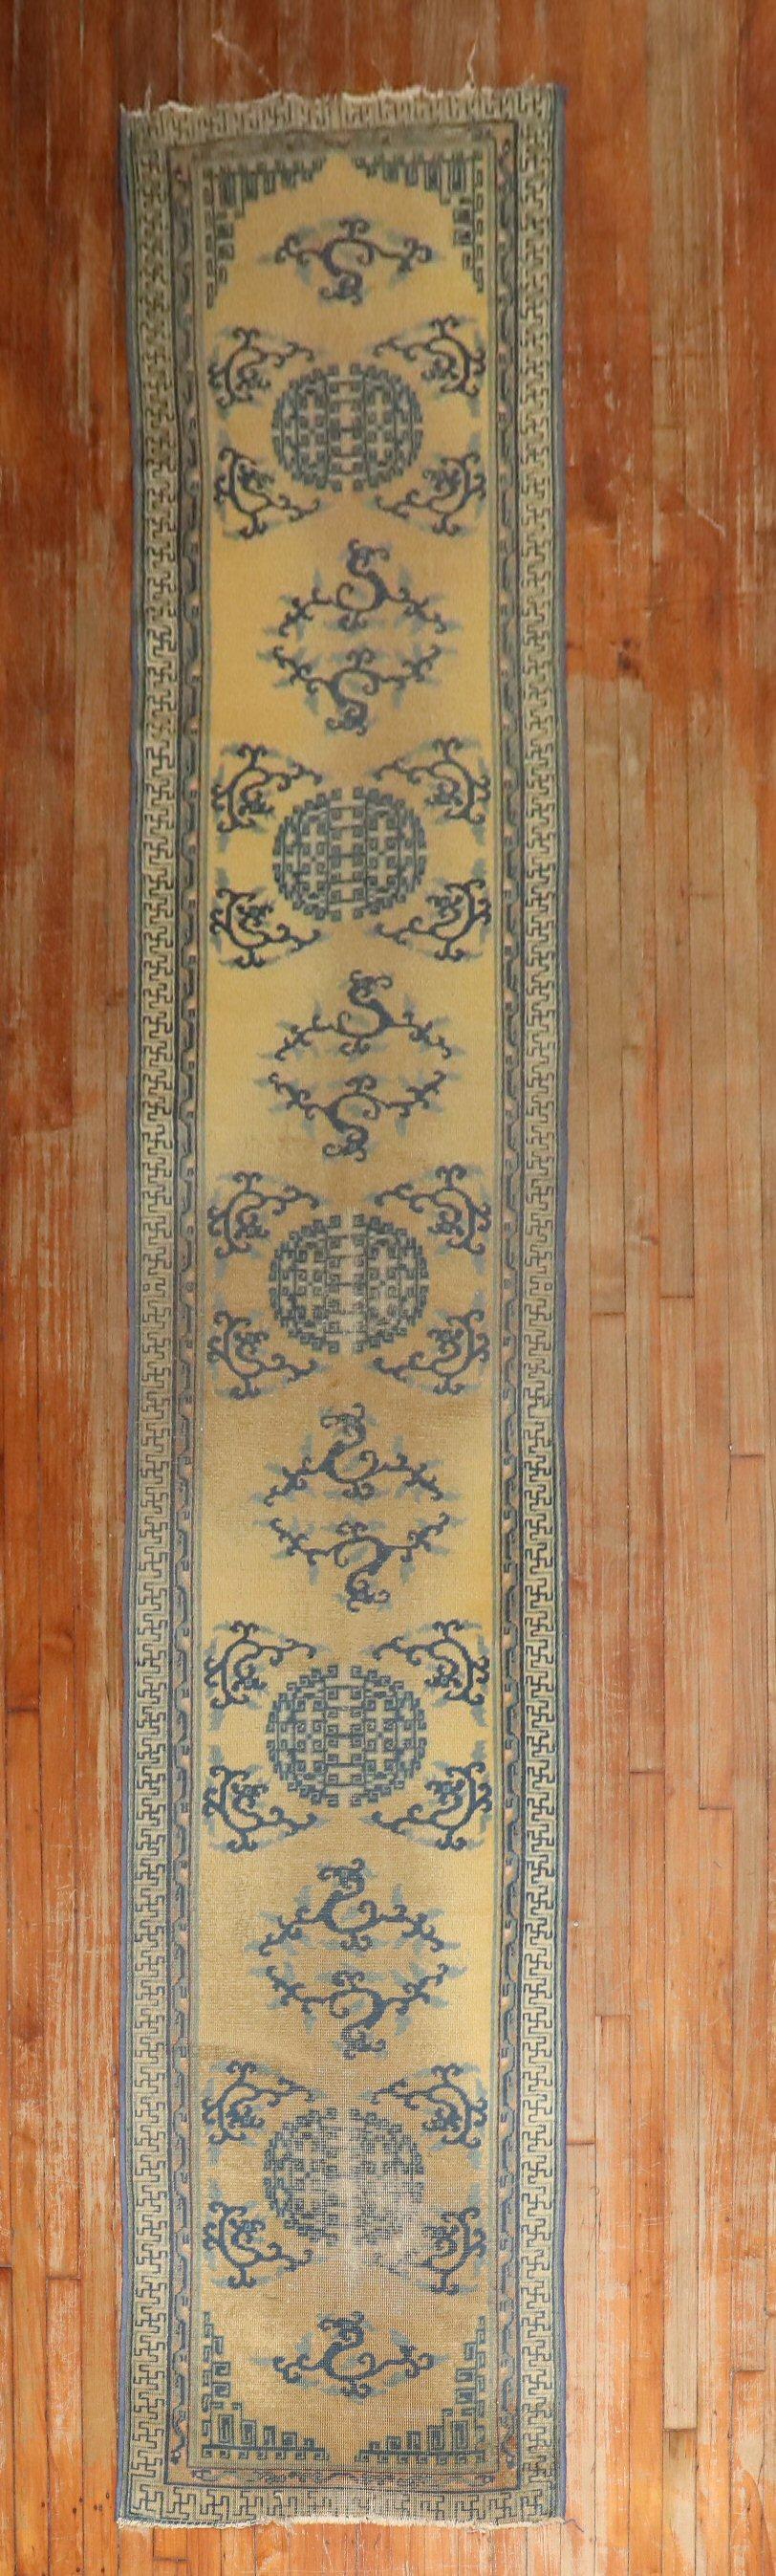 Late 19th century narrow and long Chinese Runner

Measures: 2'5'' x 14'5